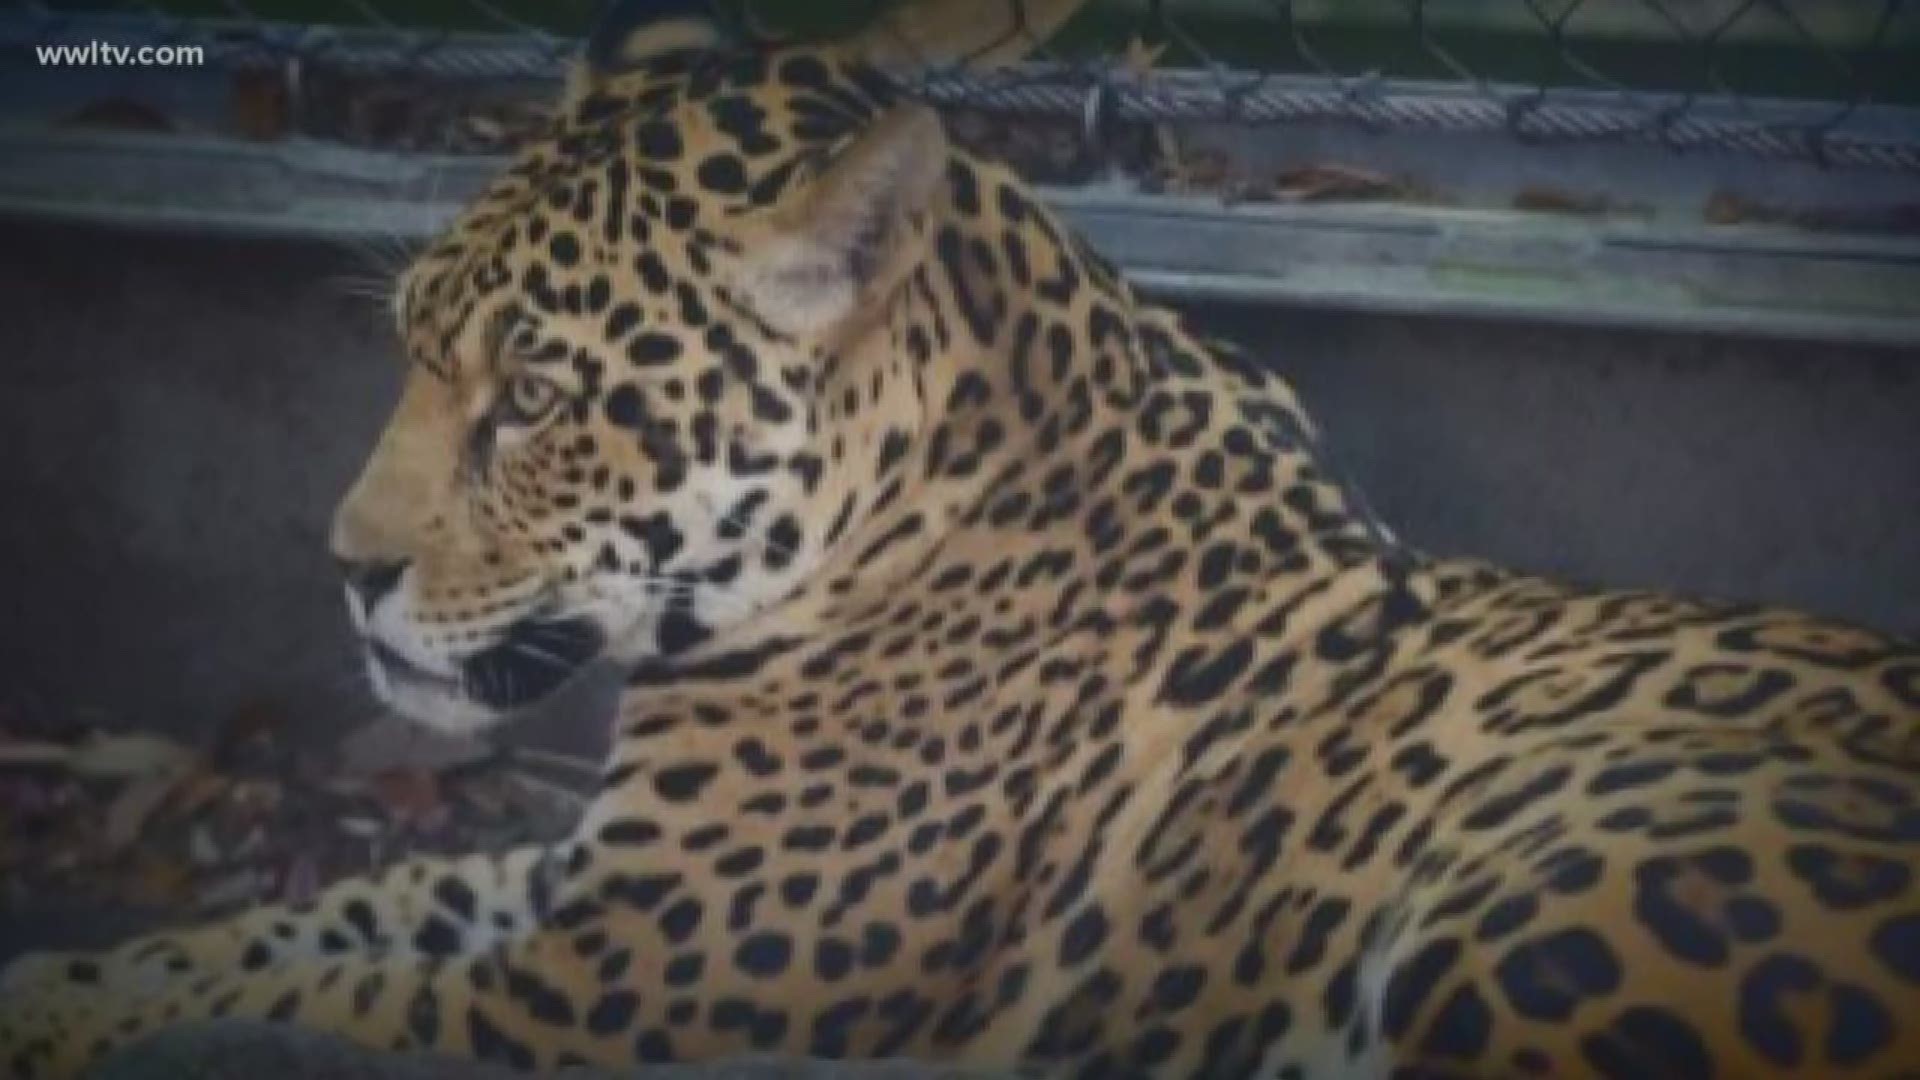 Zoo officials say jaguar exhibit appears 'compromised'